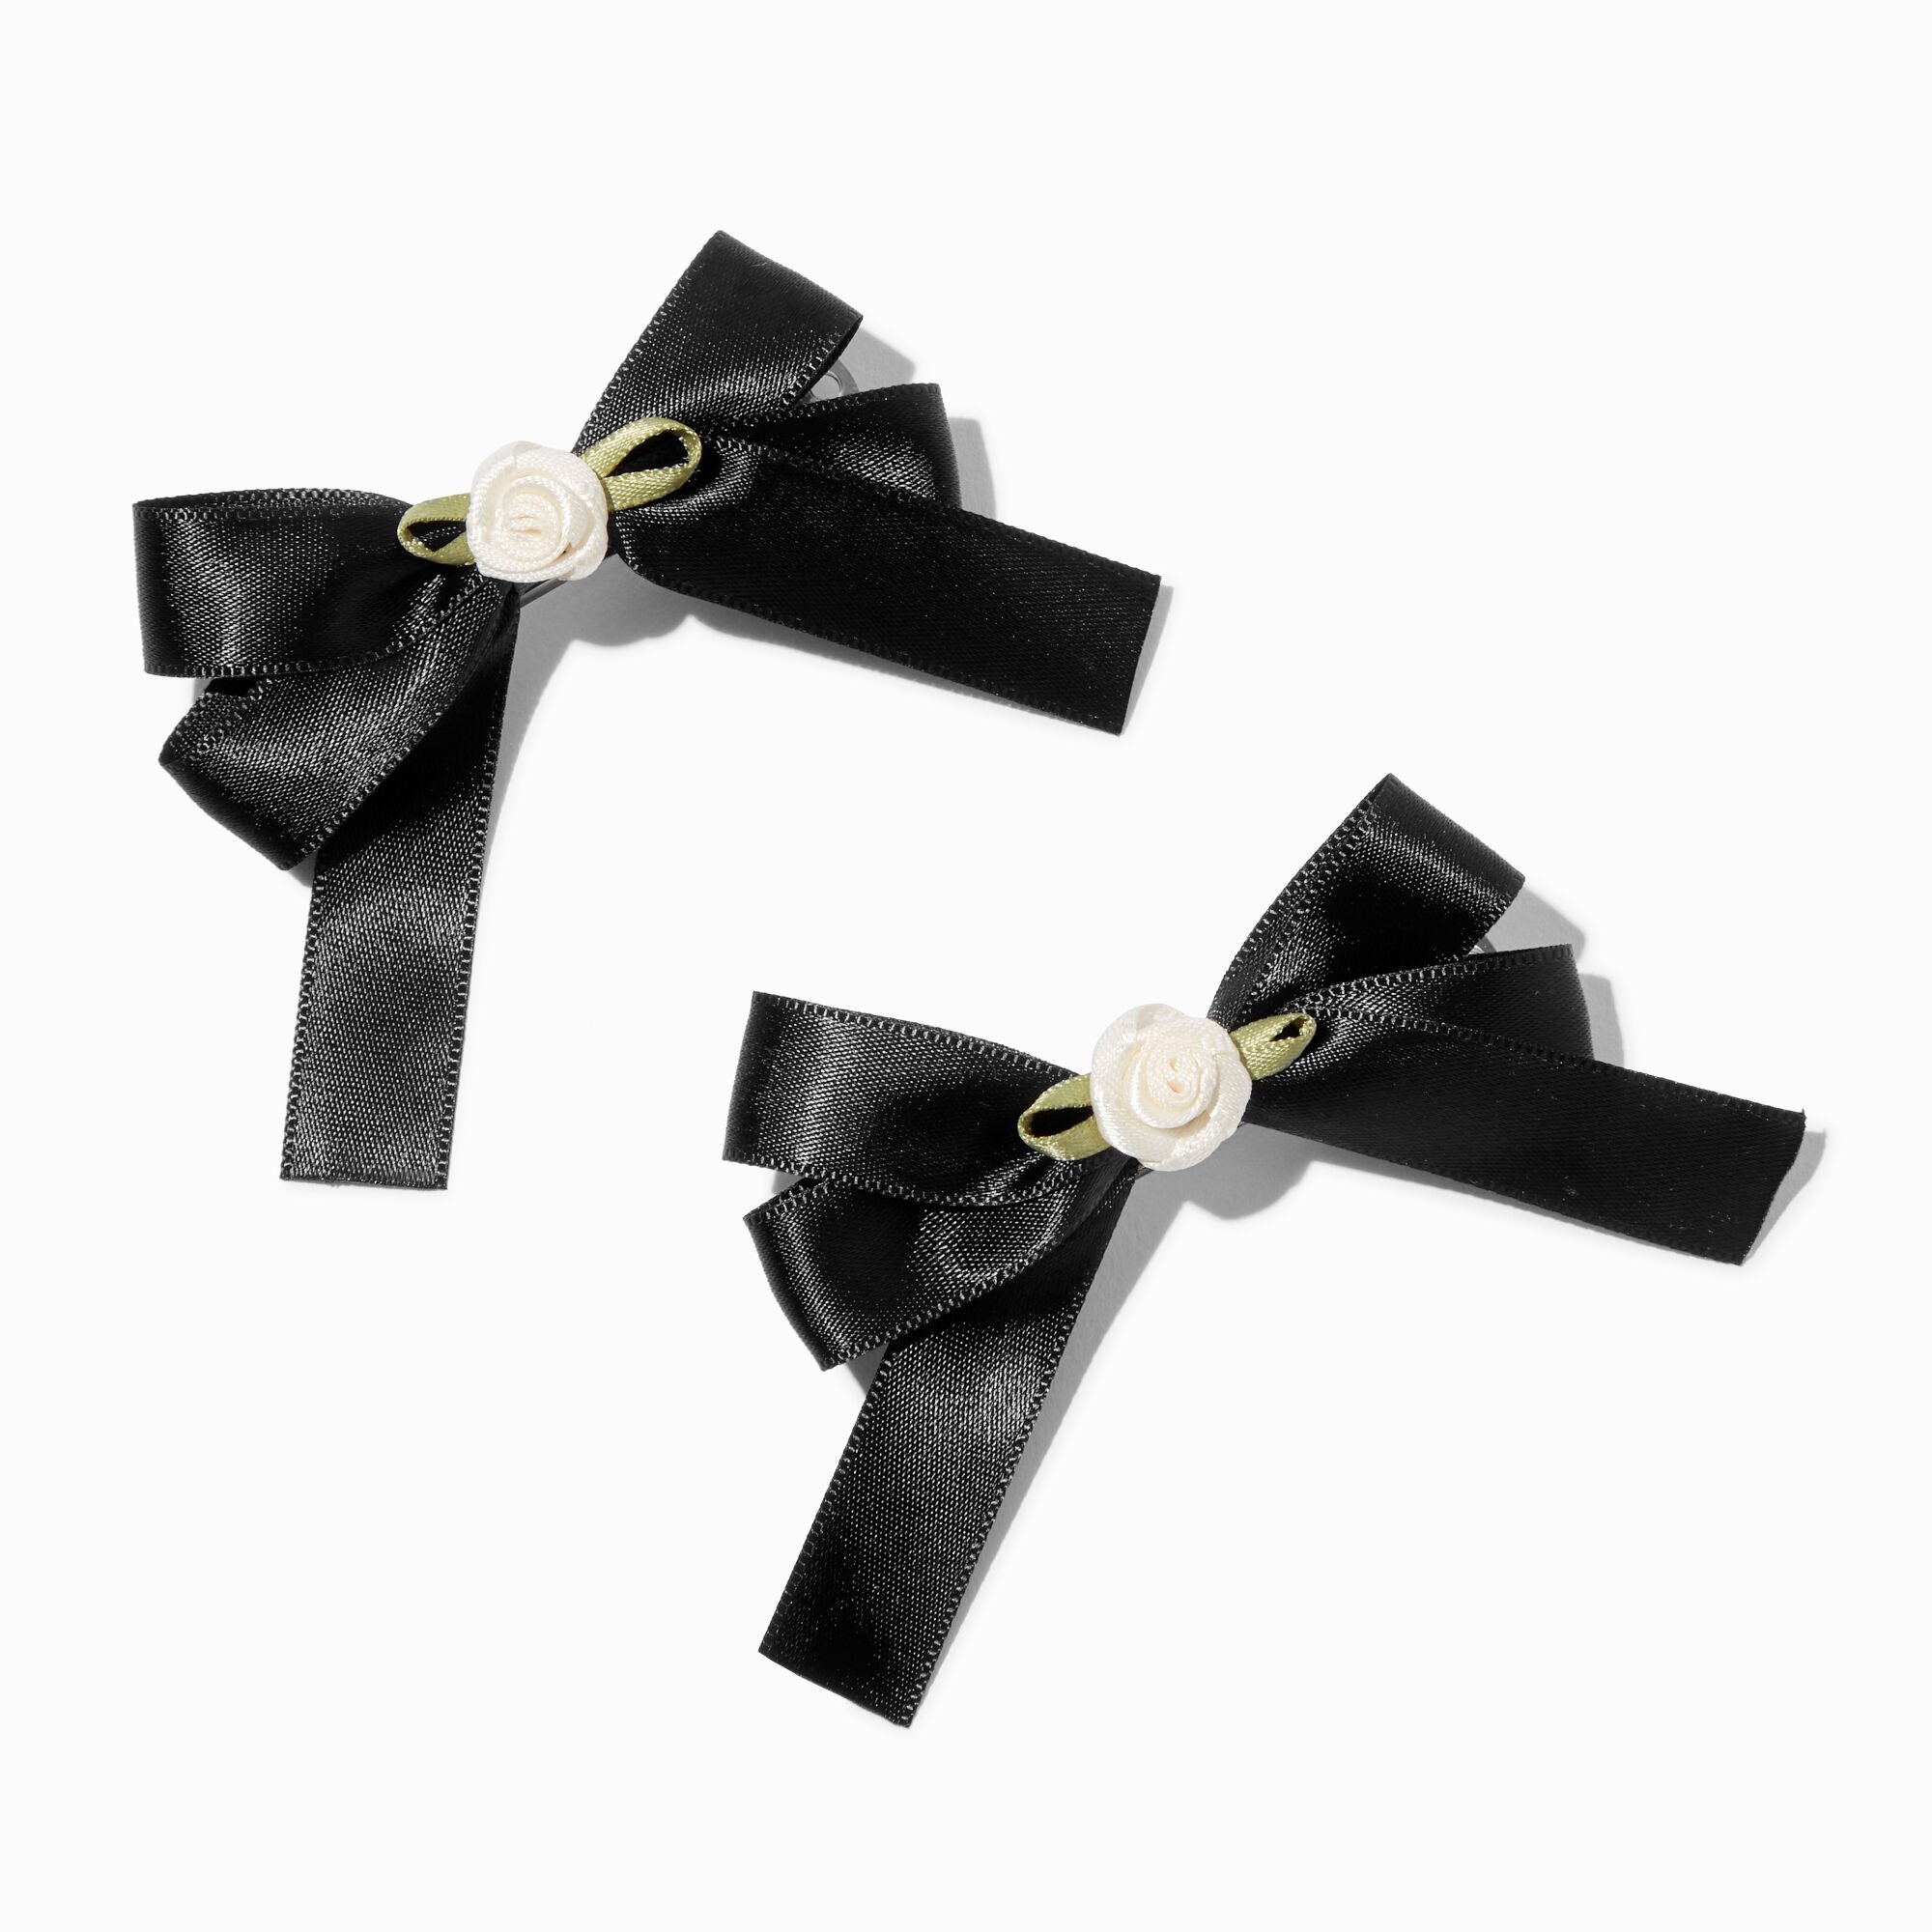 View Claires Floral Embellished Bow Hair Clips 2 Pack Black information